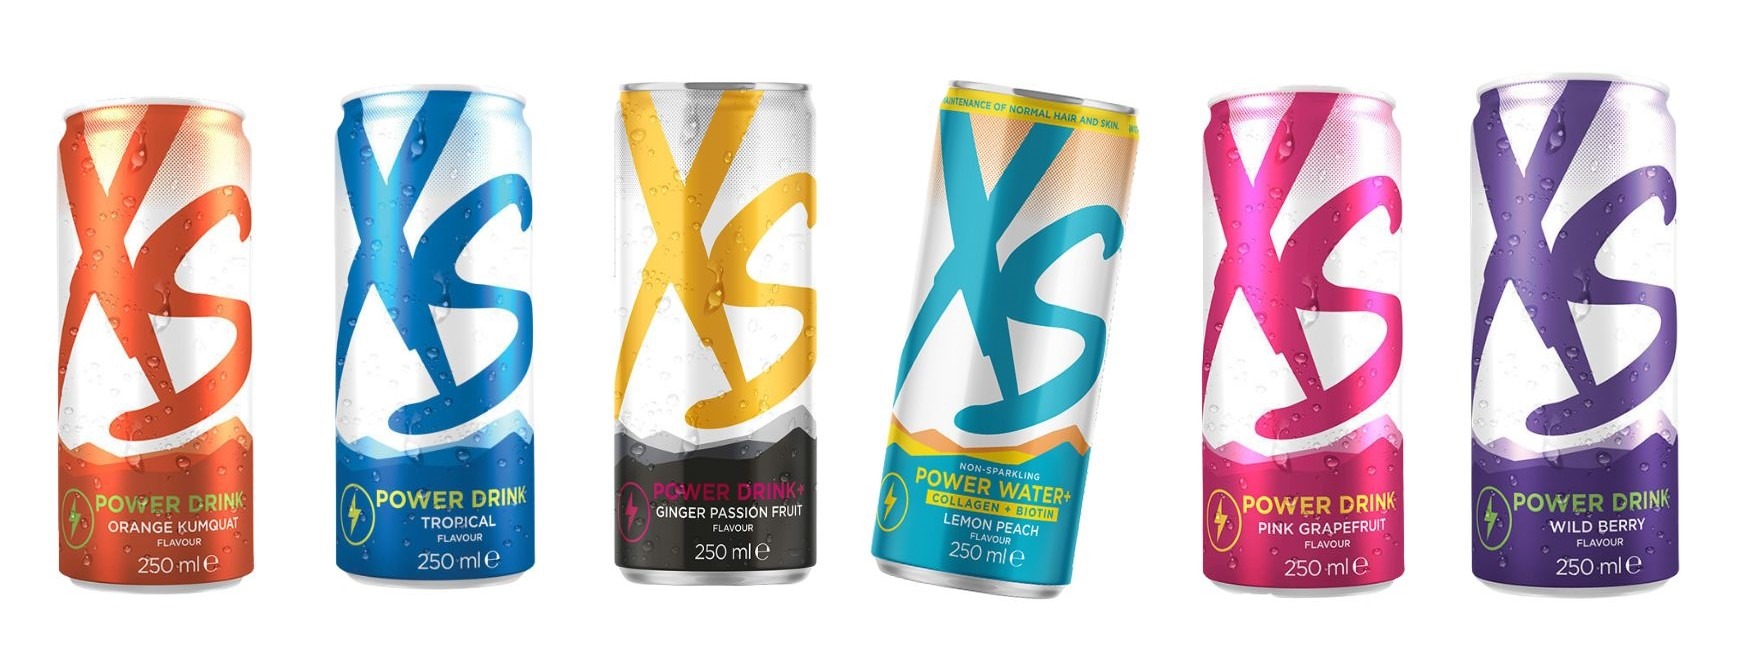 XS Drink